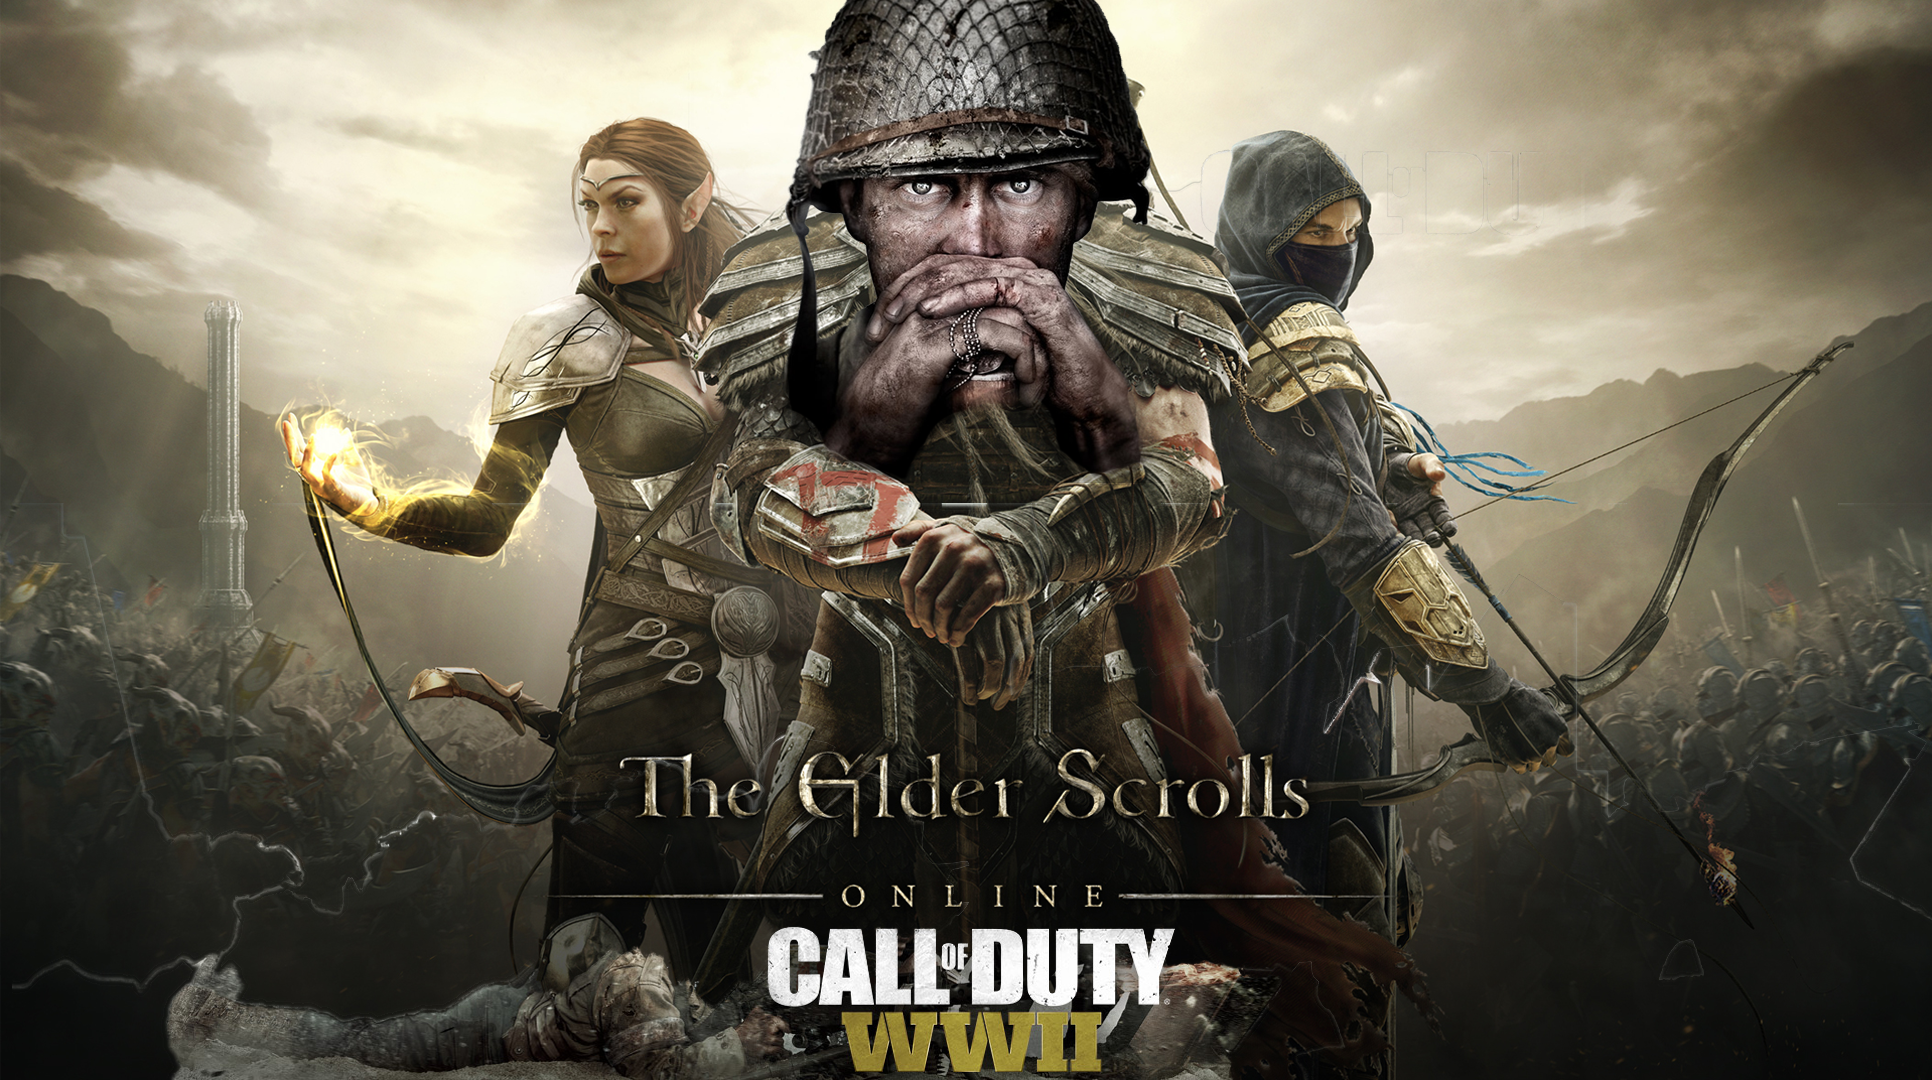 Call of Duty Expansion for Elder Scrolls Online